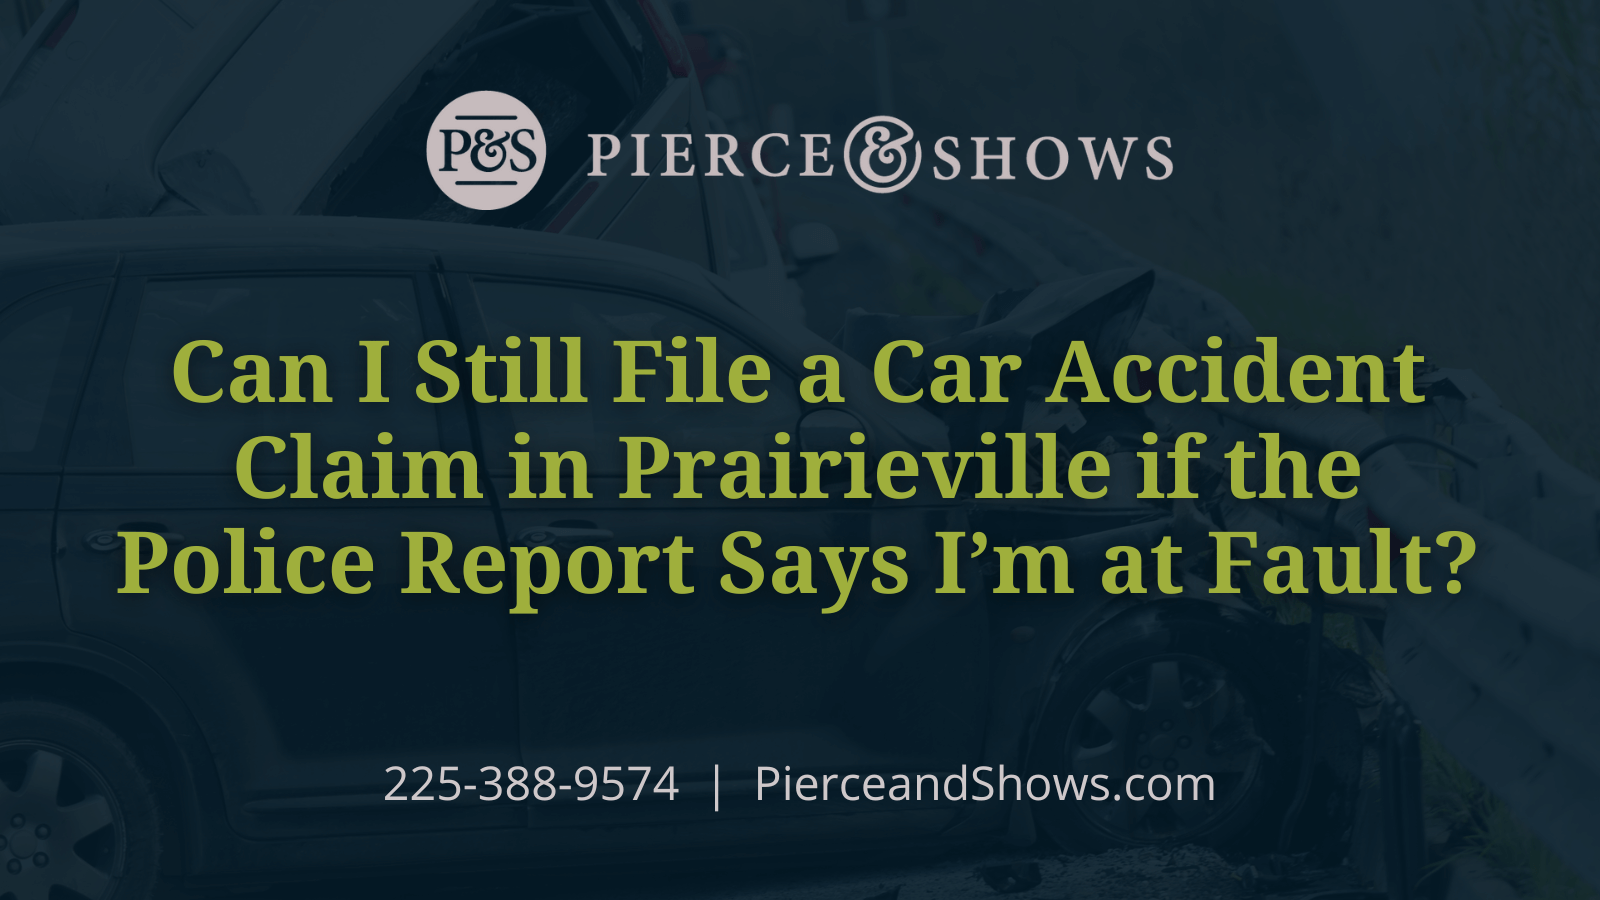 Can I Still File a Car Accident Claim in Prairieville if the Police Report Says I’m at Fault? - Baton Rouge Louisiana injury attorney Pierce & Shows